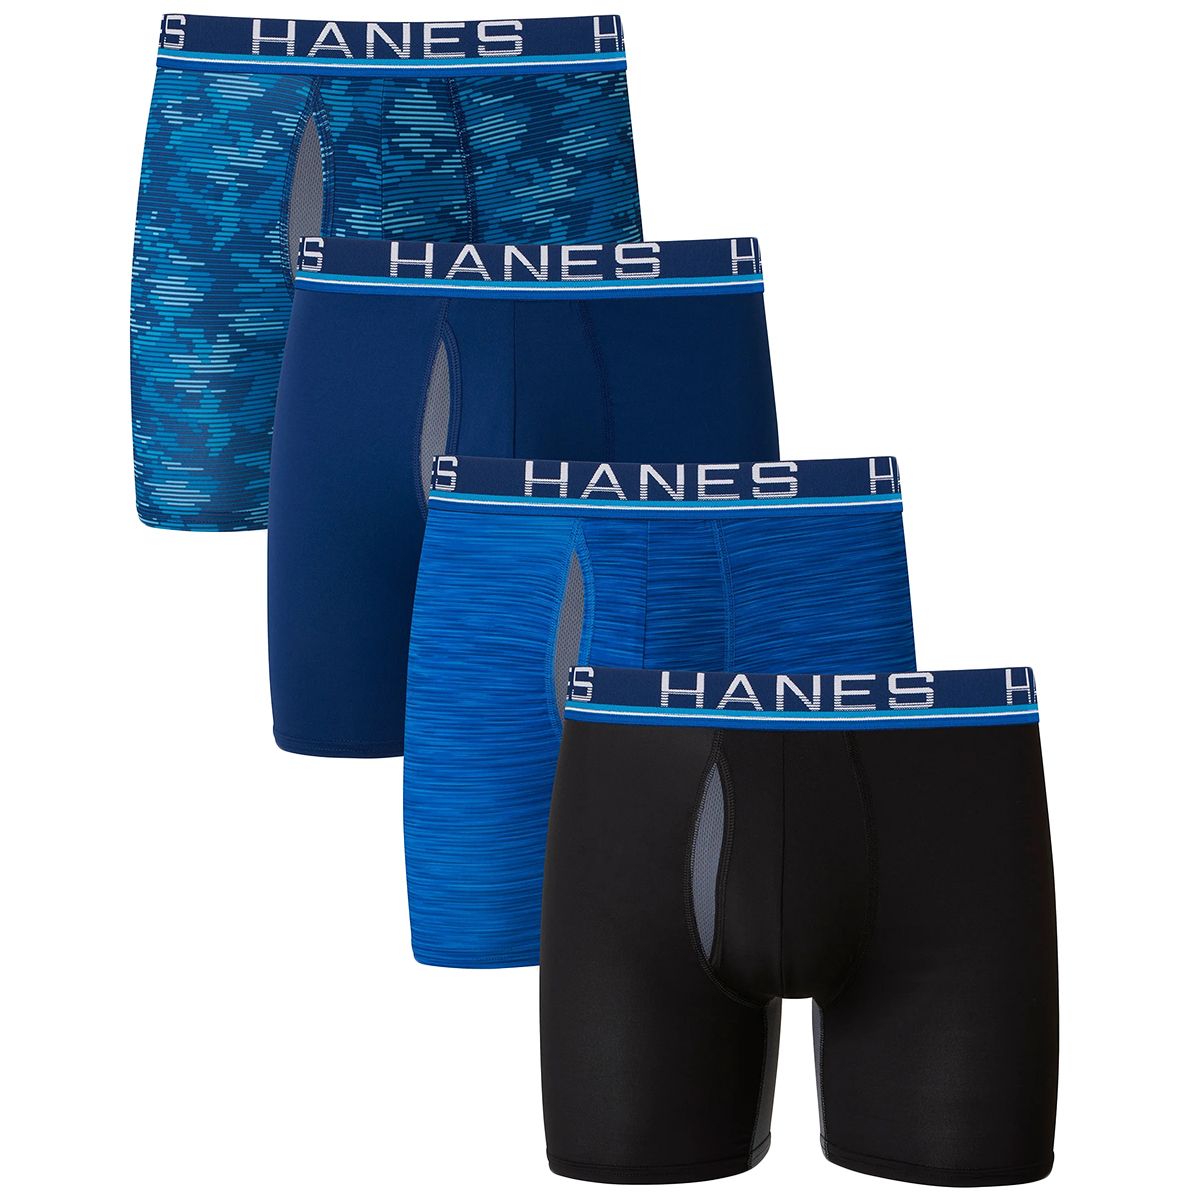 HANES Ultimate Men's 100% Cotton Full-Rise Briefs, 7-Pack Extended Size -  Bob's Stores